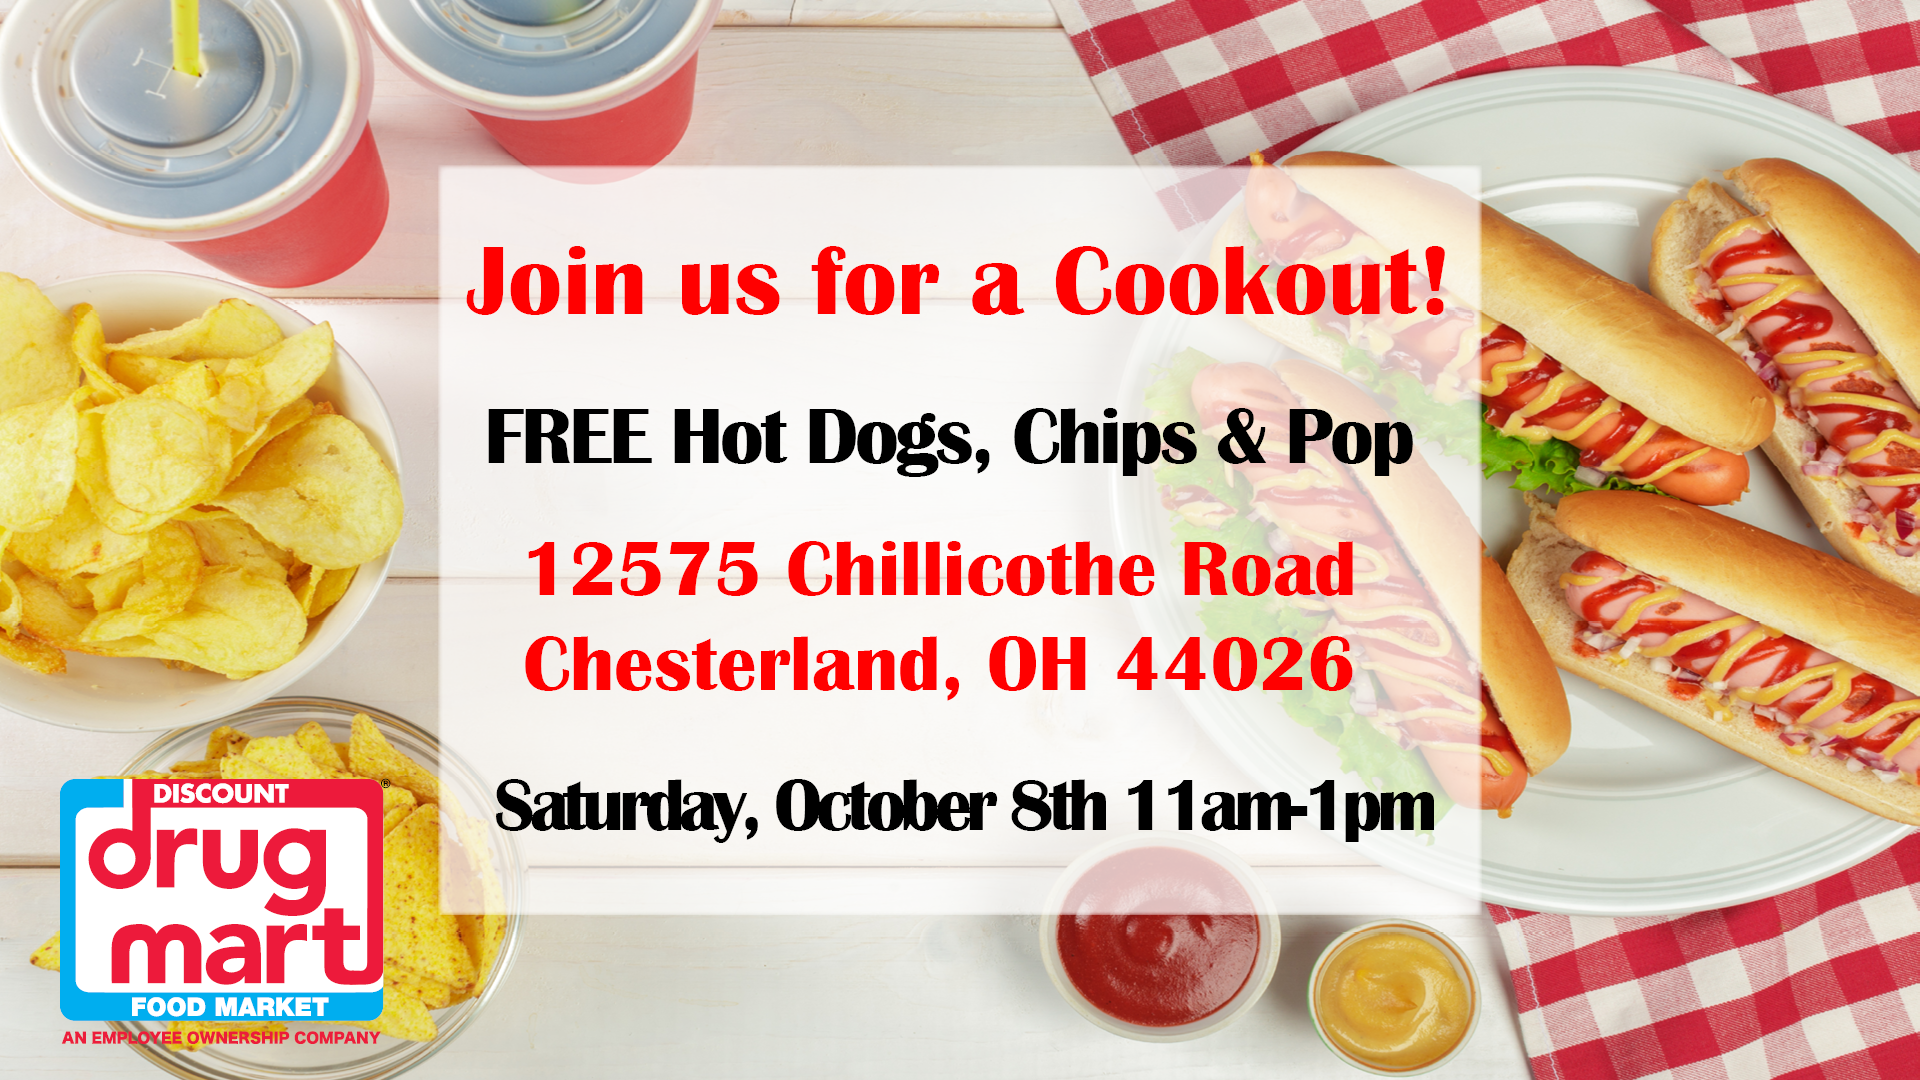 Chesterland Cookout - Store #34 @ Discount Drug Mart #34 | Chesterland | Ohio | United States